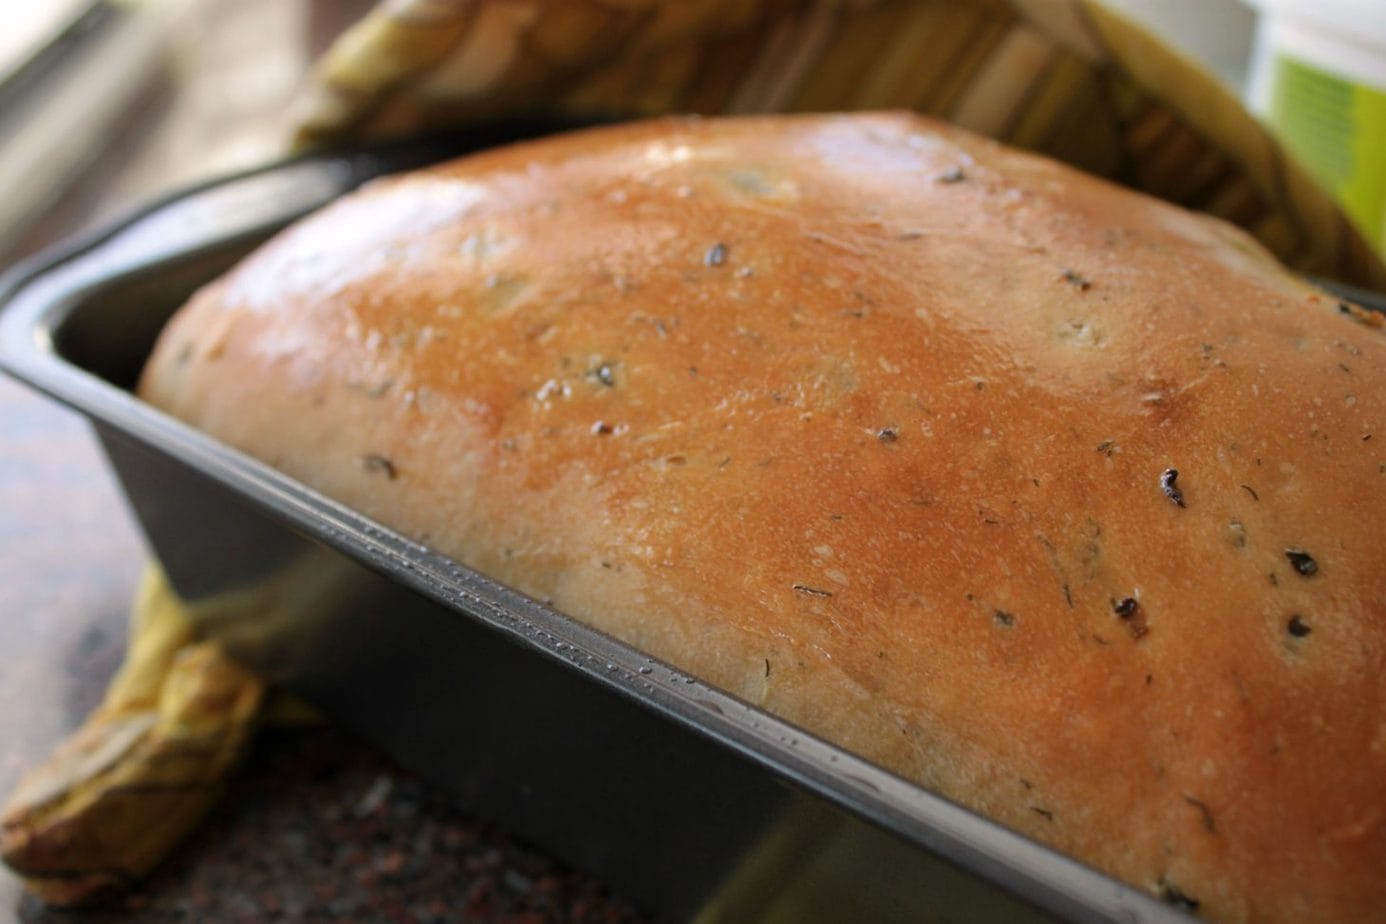 For a treat, nothing beats home made bread...or does it?